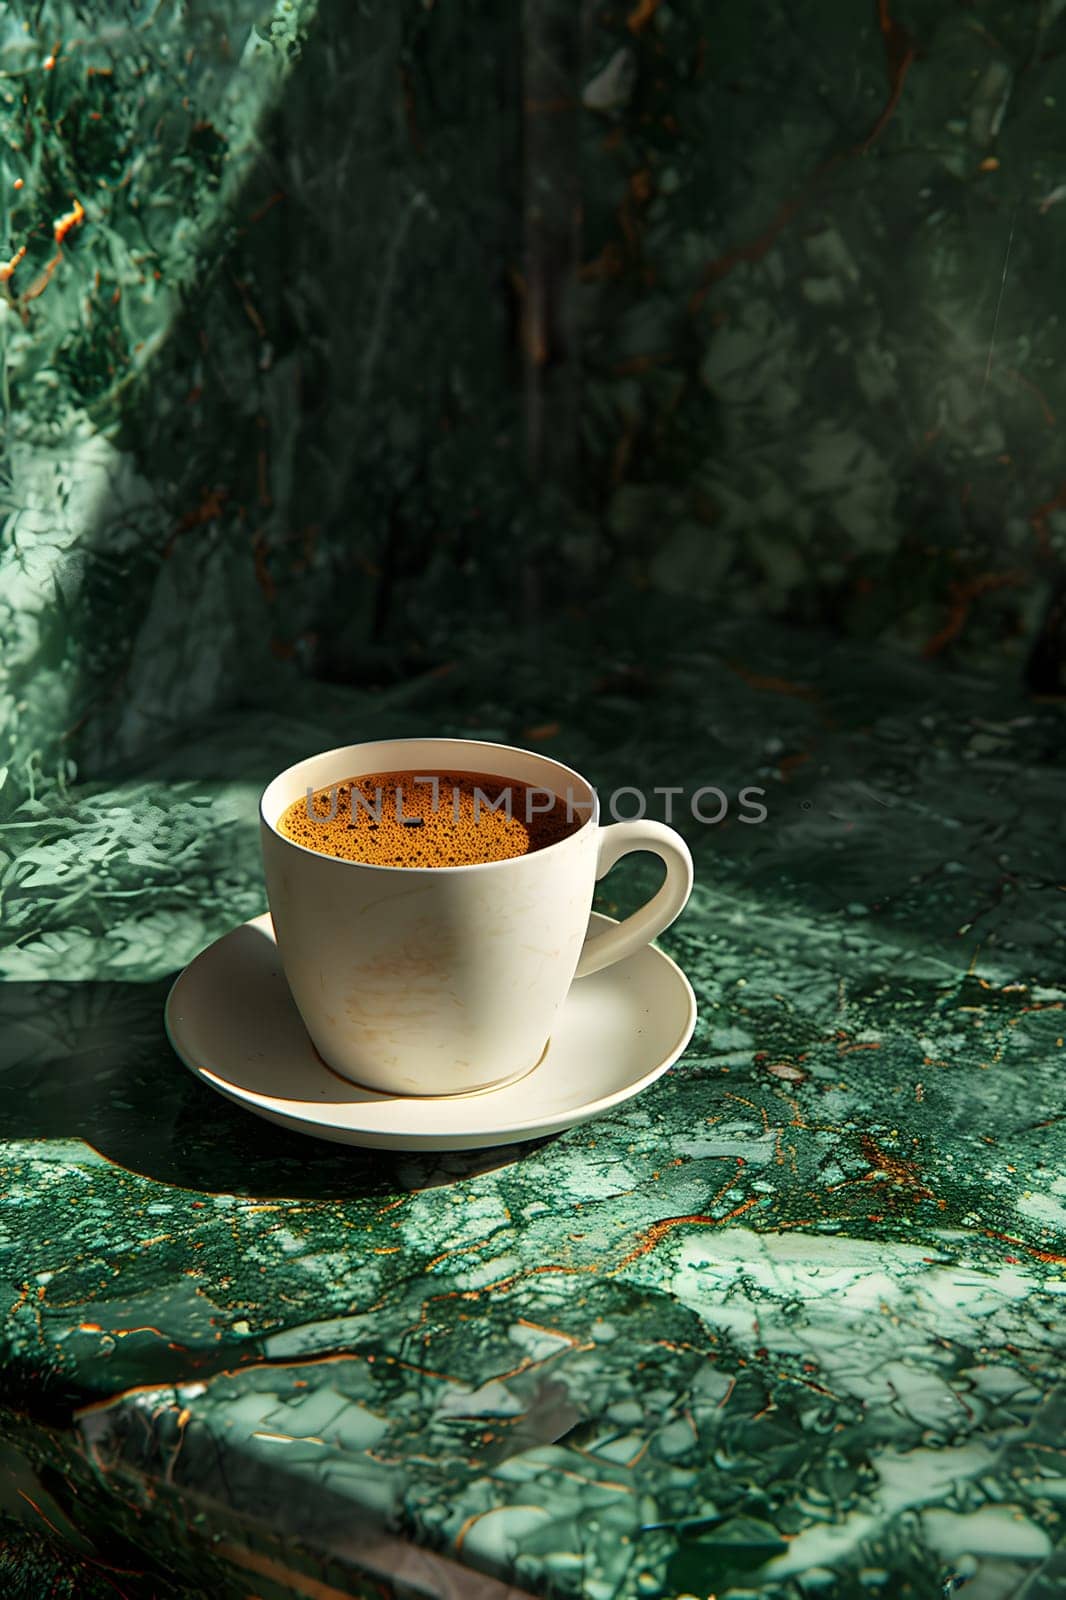 A singleorigin coffee cup with saucer is placed on Tableware on a green marble surface, ready to be enjoyed as a delicious drink